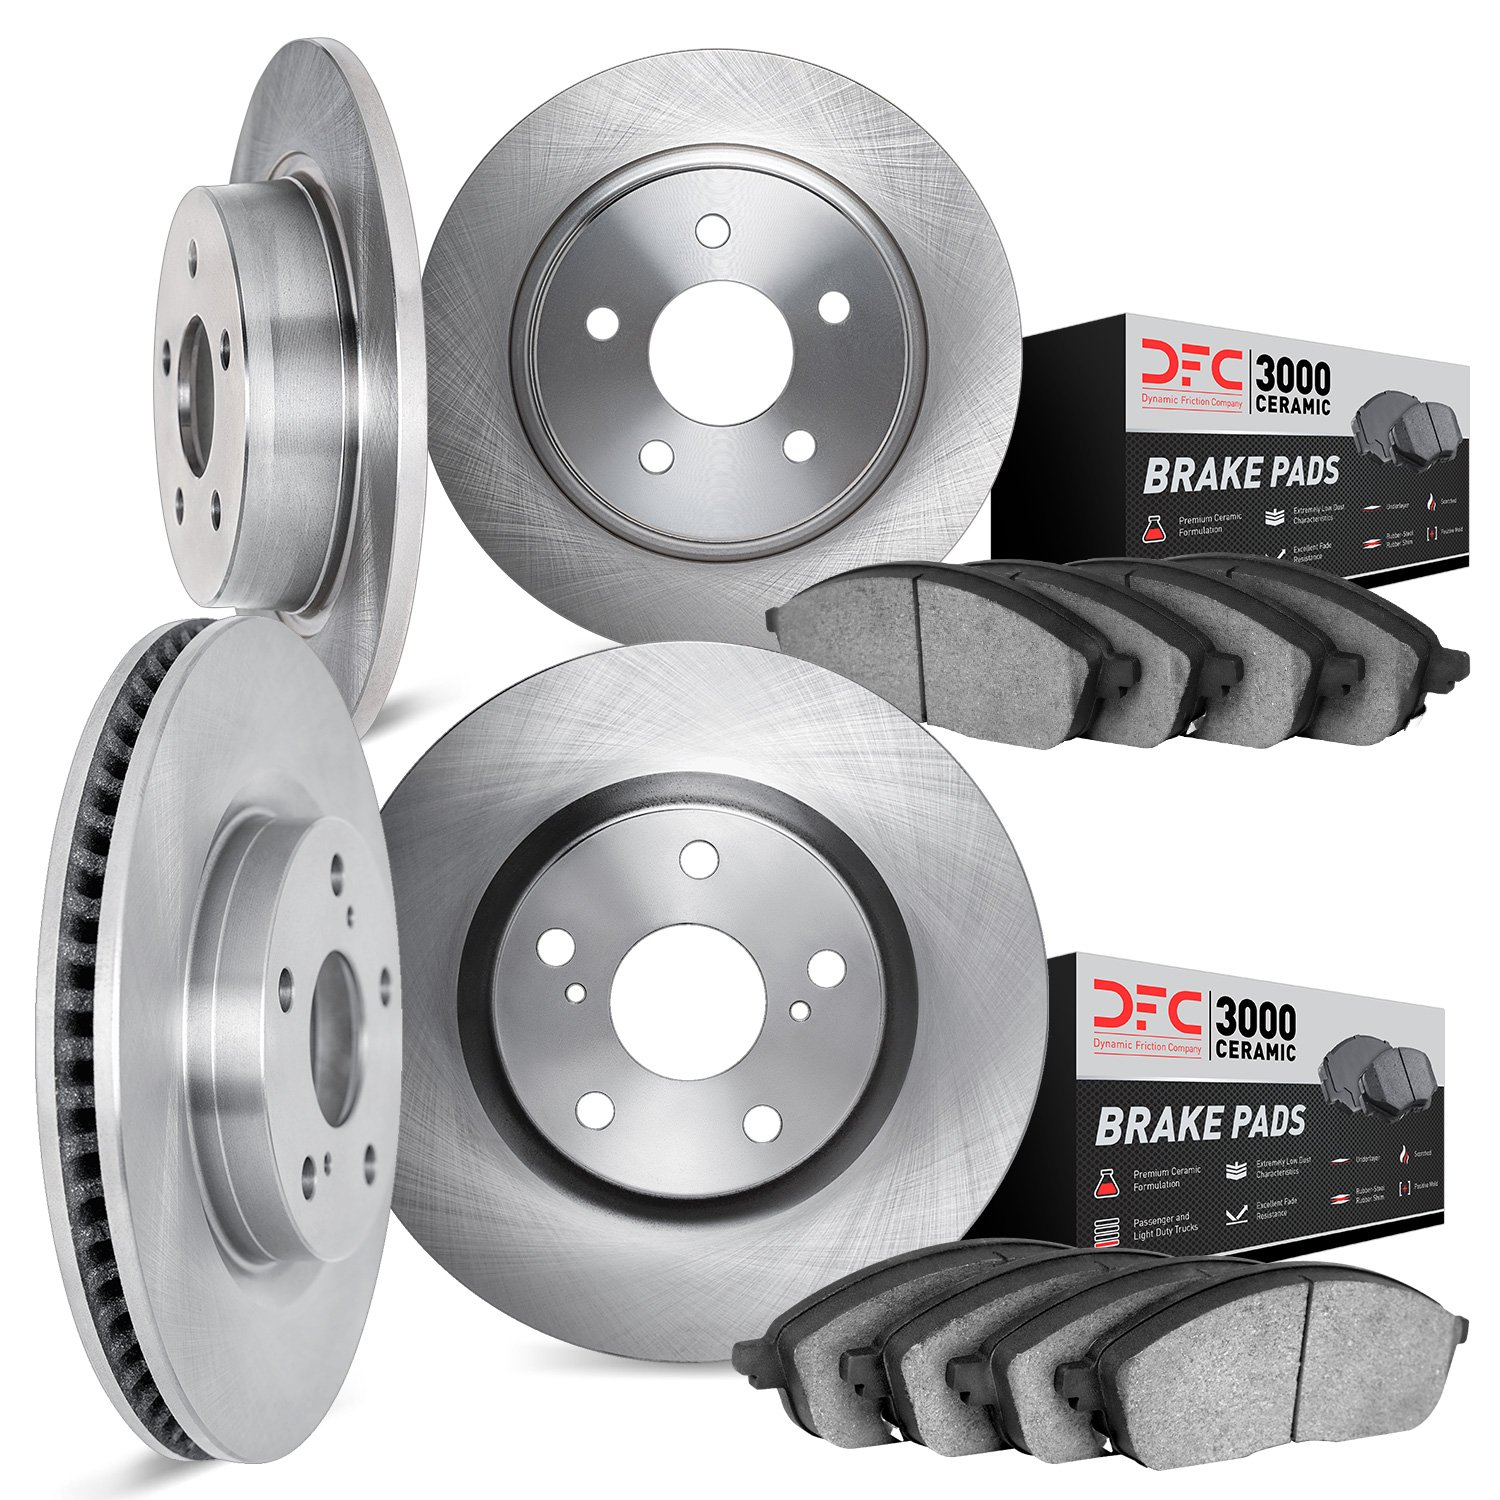 6304-39028 Brake Rotors with 3000-Series Ceramic Brake Pads Kit, Fits Select Mopar, Position: Front and Rear